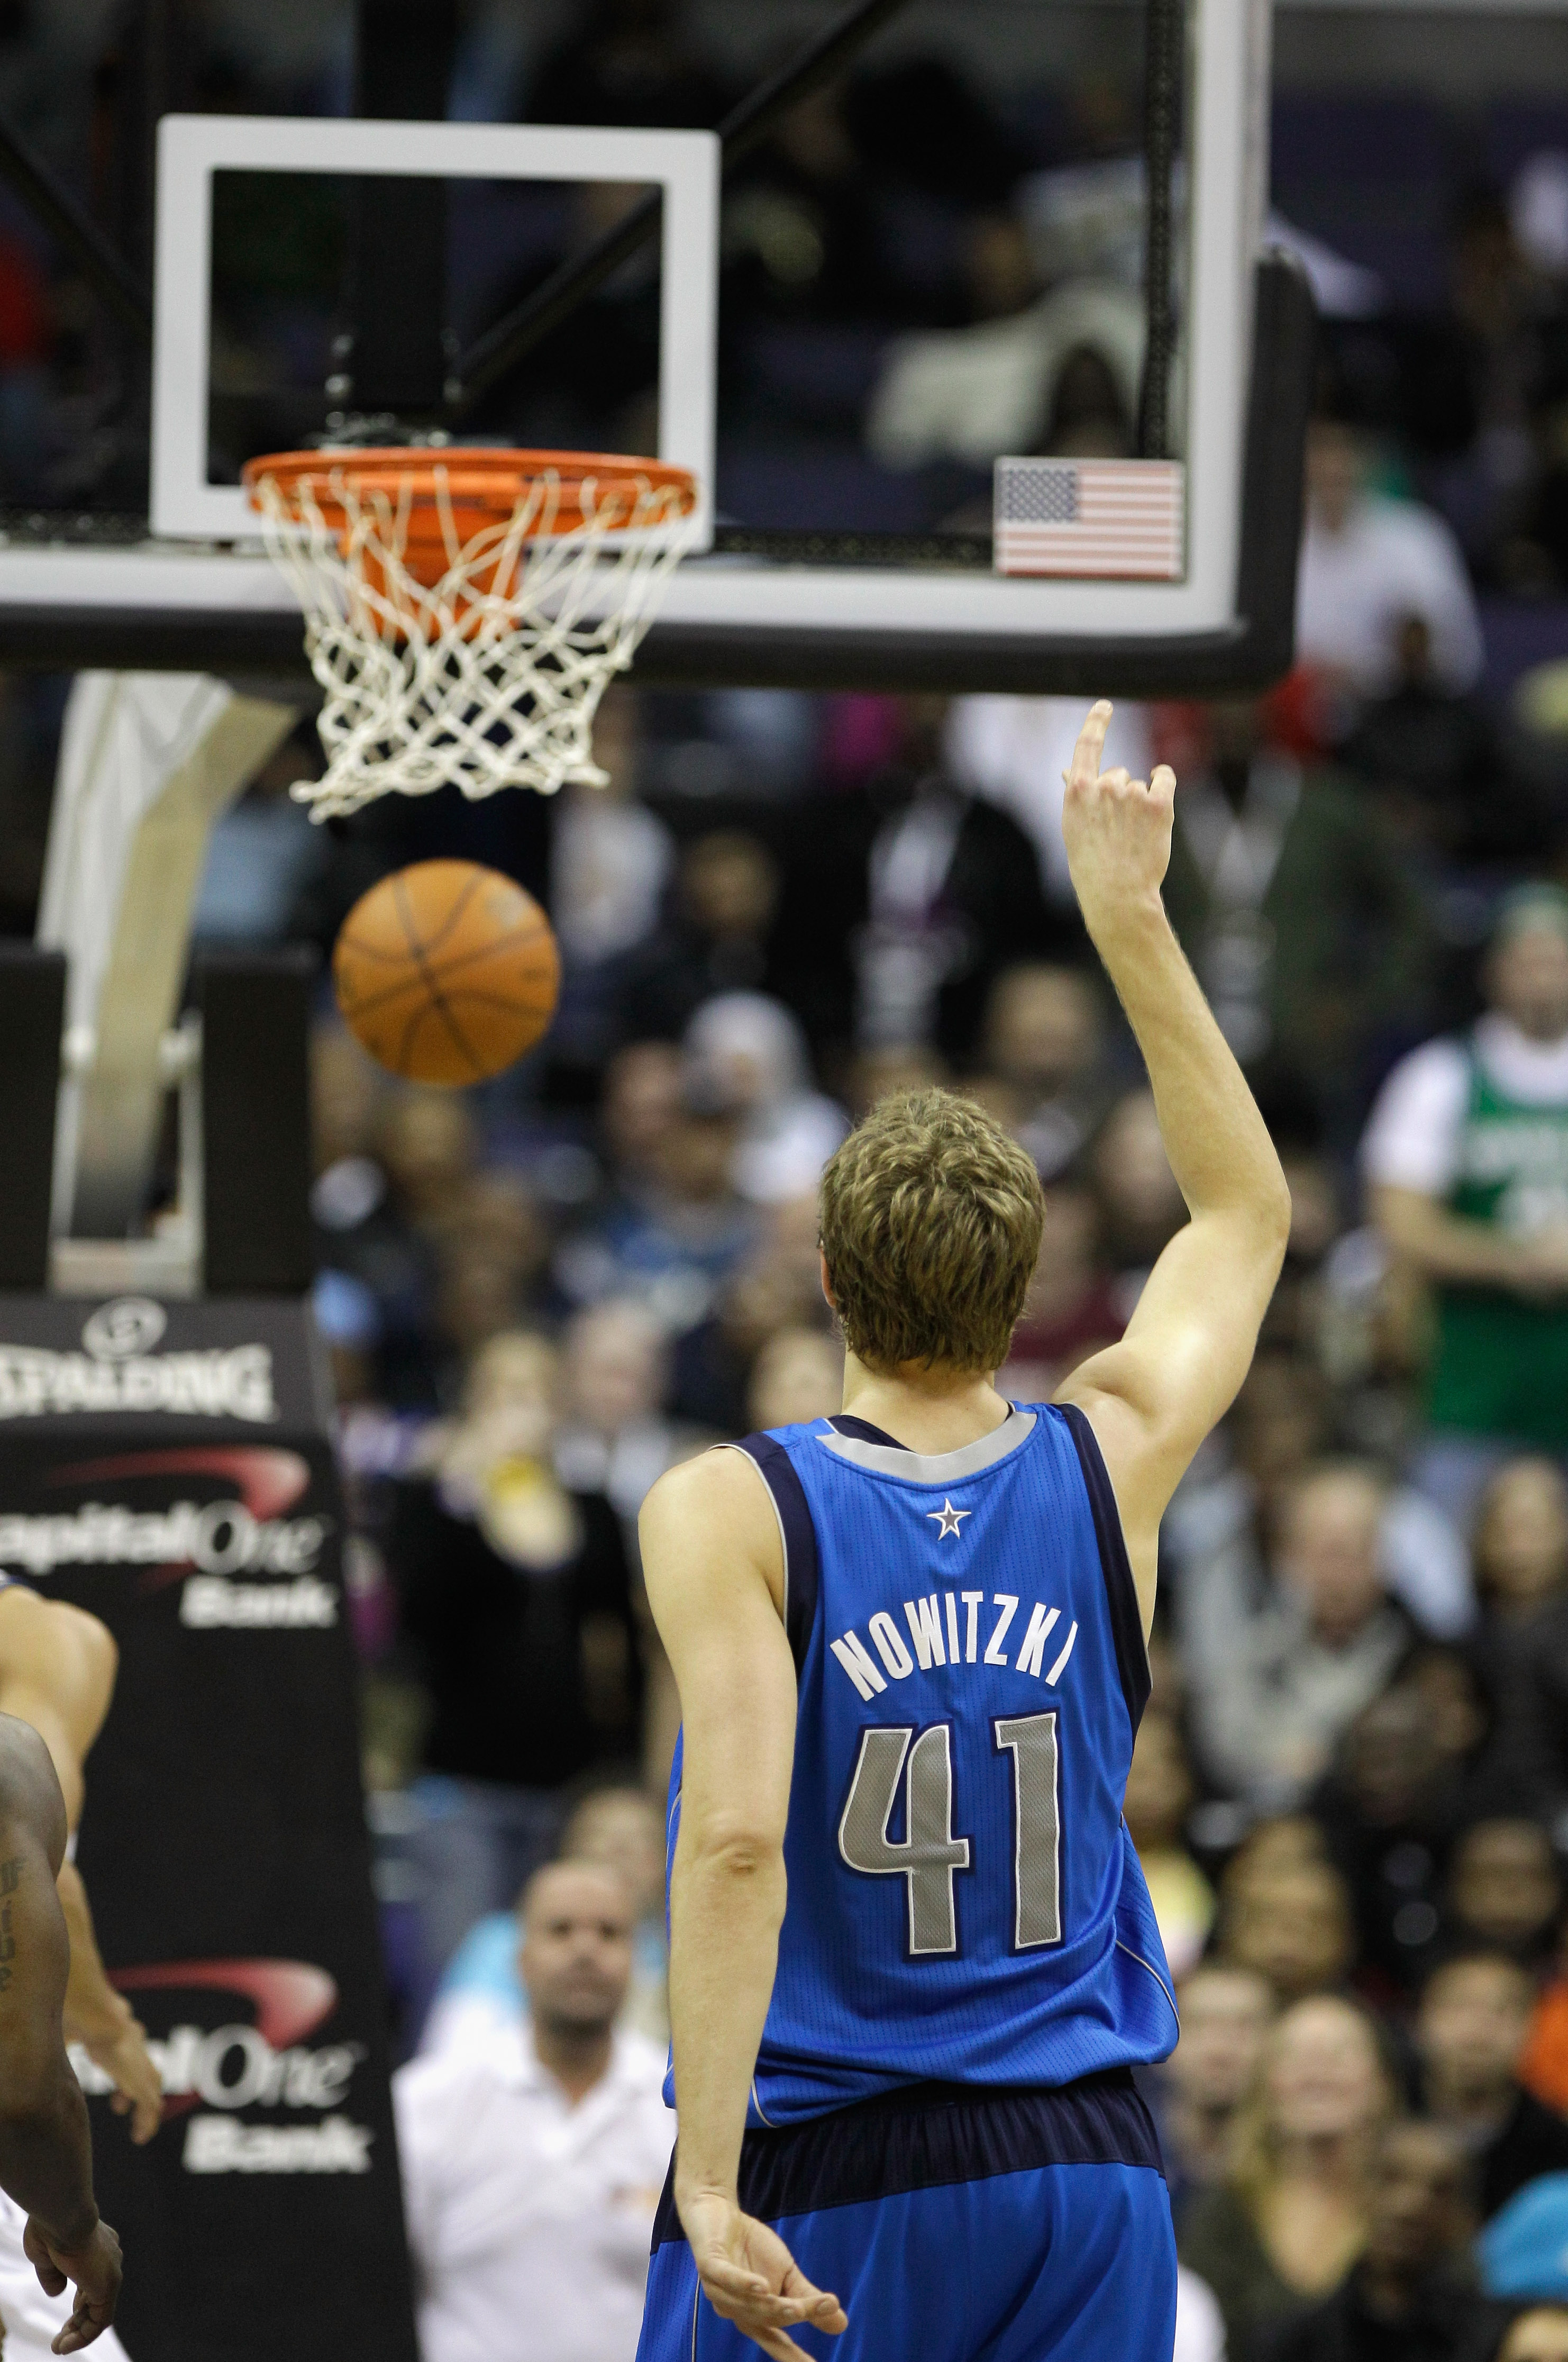 WASHINGTON, DC - FEBRUARY 26: Dirk Nowitzki #41 of the Dallas Mavericks shoots a free throw against the Washington Wizards at the Verizon Center on February 26, 2011 in Washington, DC. NOTE TO USER: User expressly acknowledges and agrees that, by download